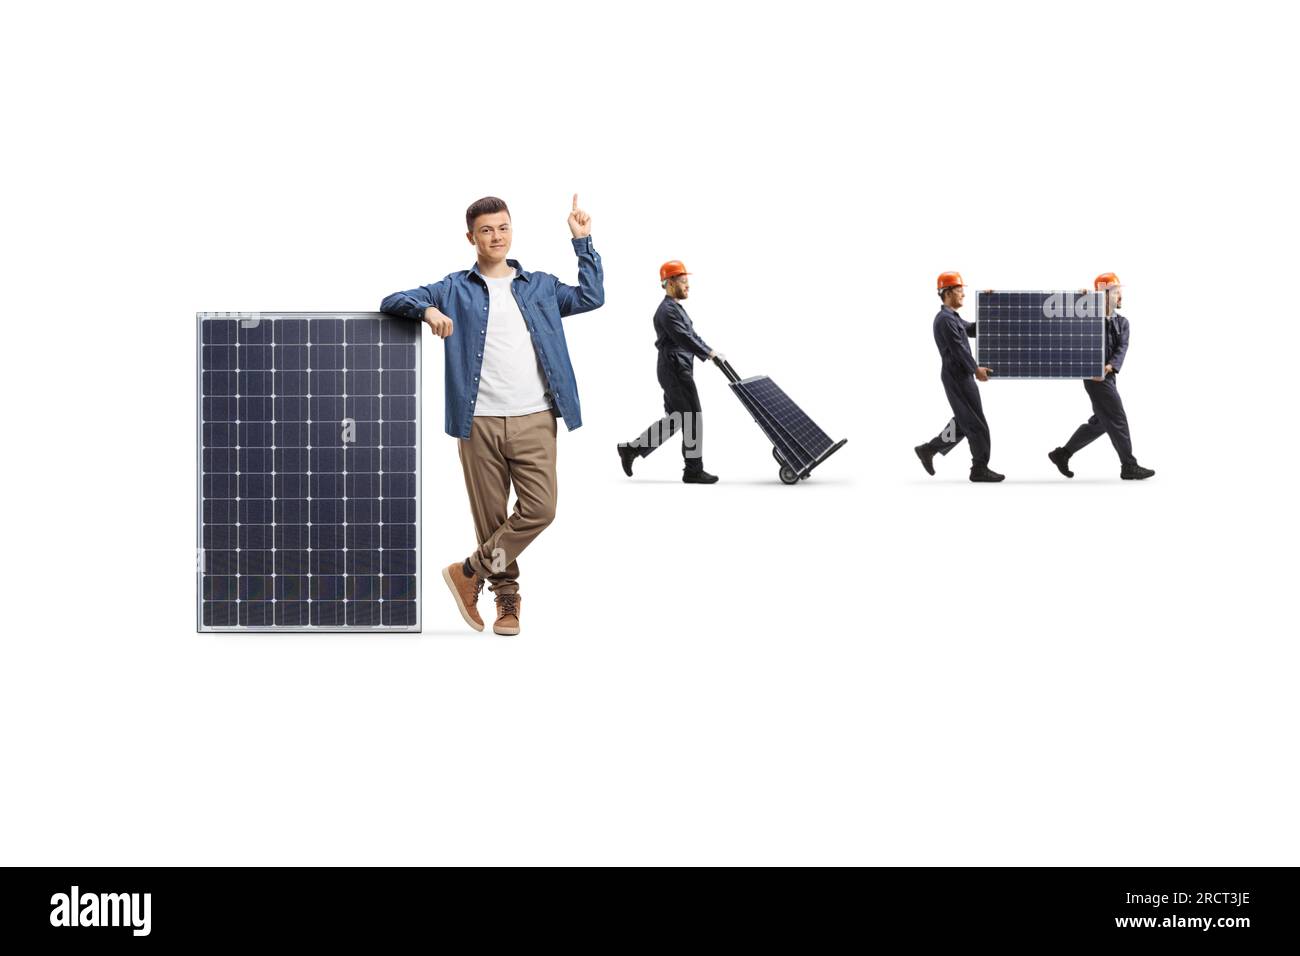 Casual guy leaning on a solar panel in front of workers isolated on white background Stock Photo